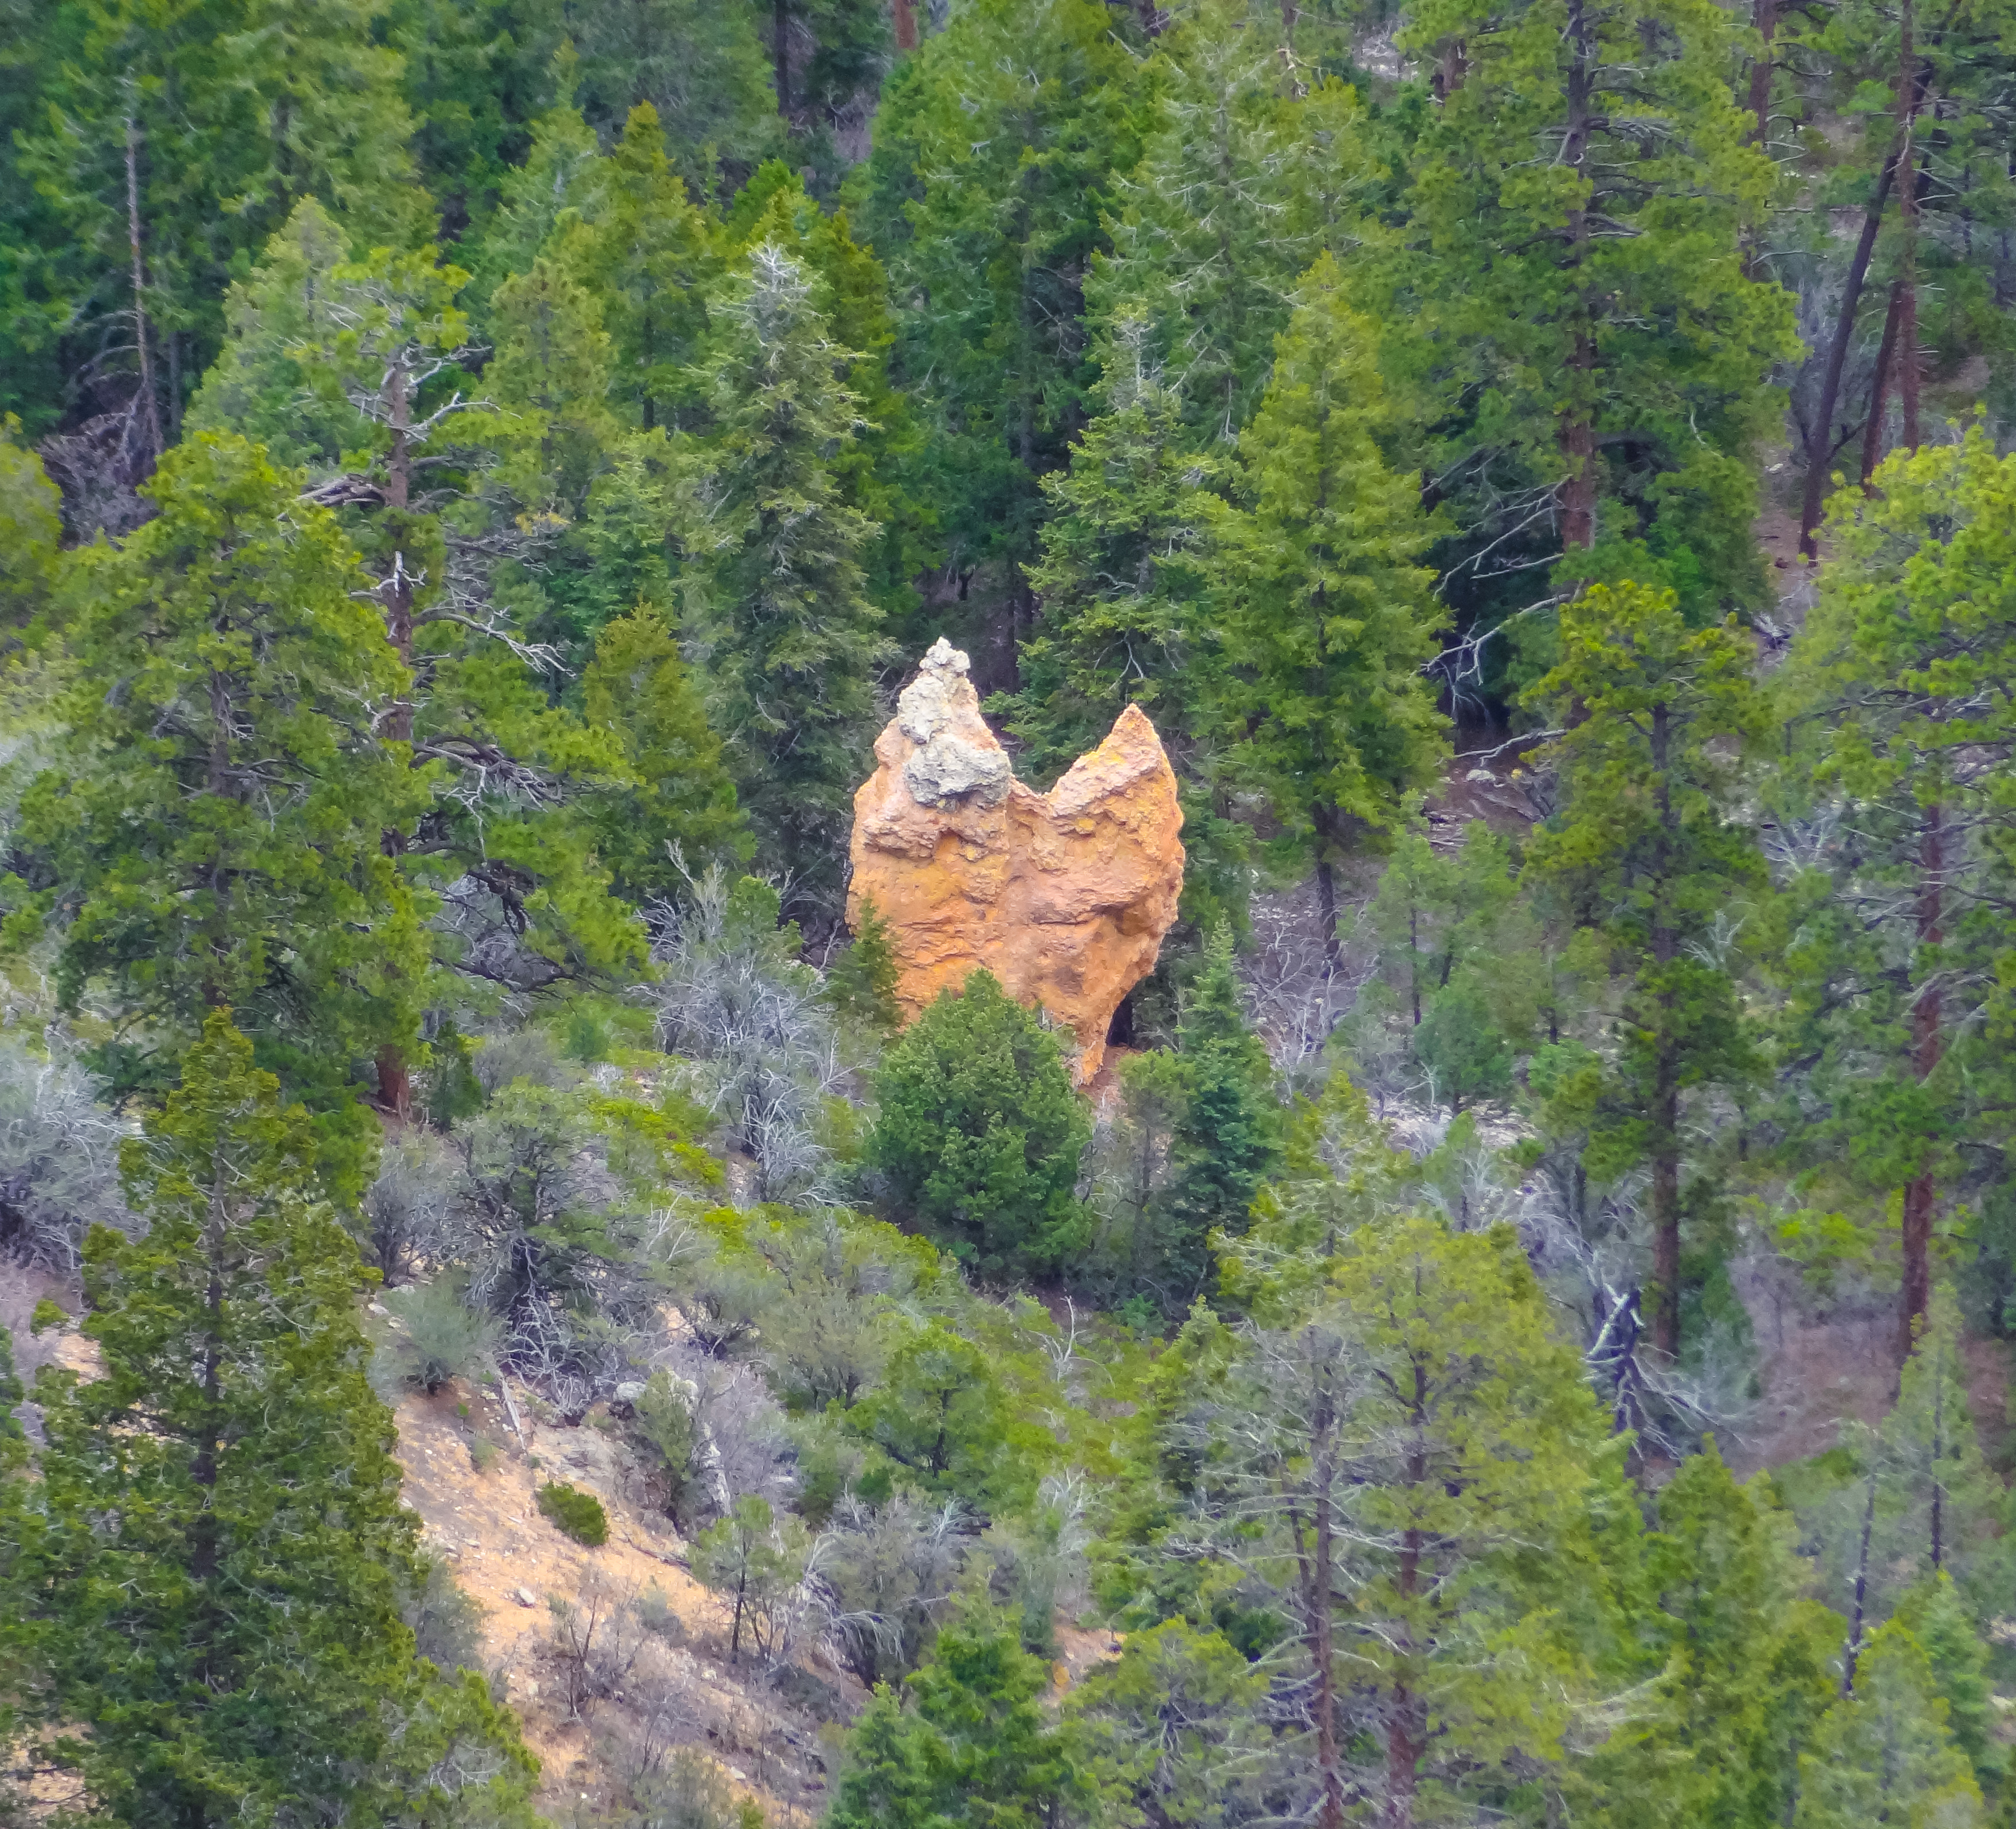 Angel wings in the hoodoos at Bryce Canyon.